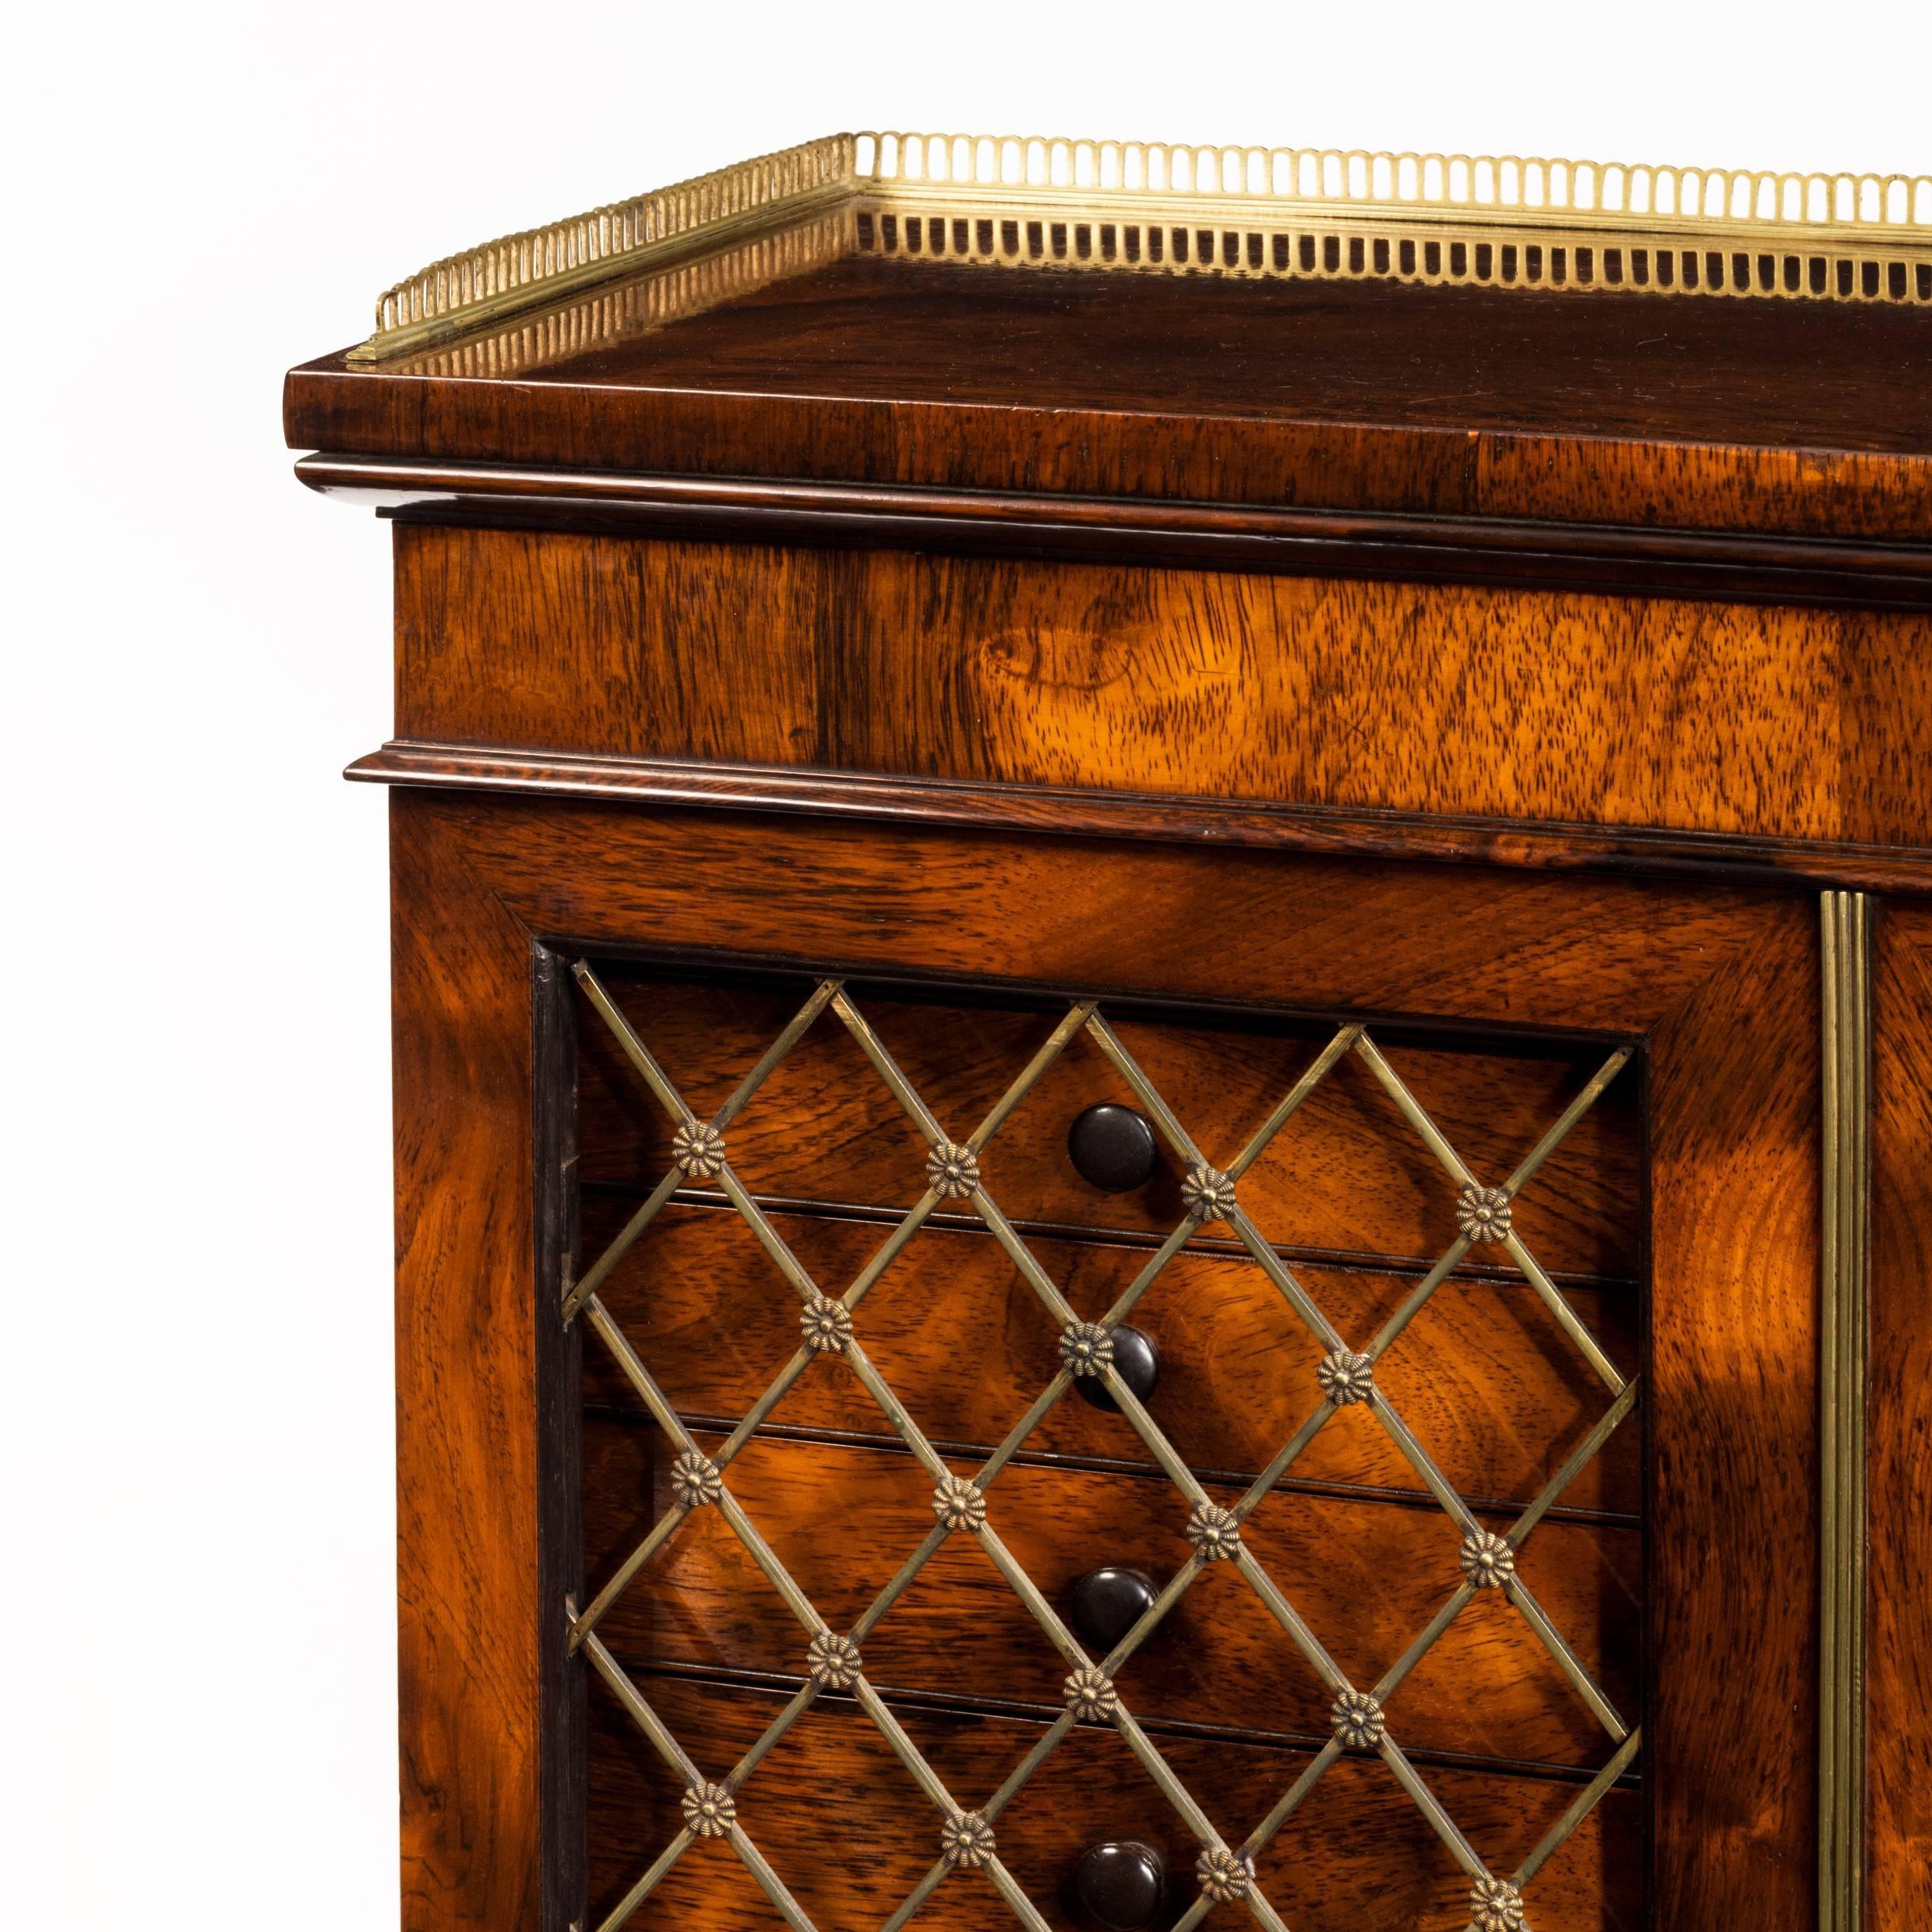 Late Regency collector's rosewood cabinet with two series of ten shallow drawers behind latticework grilles.